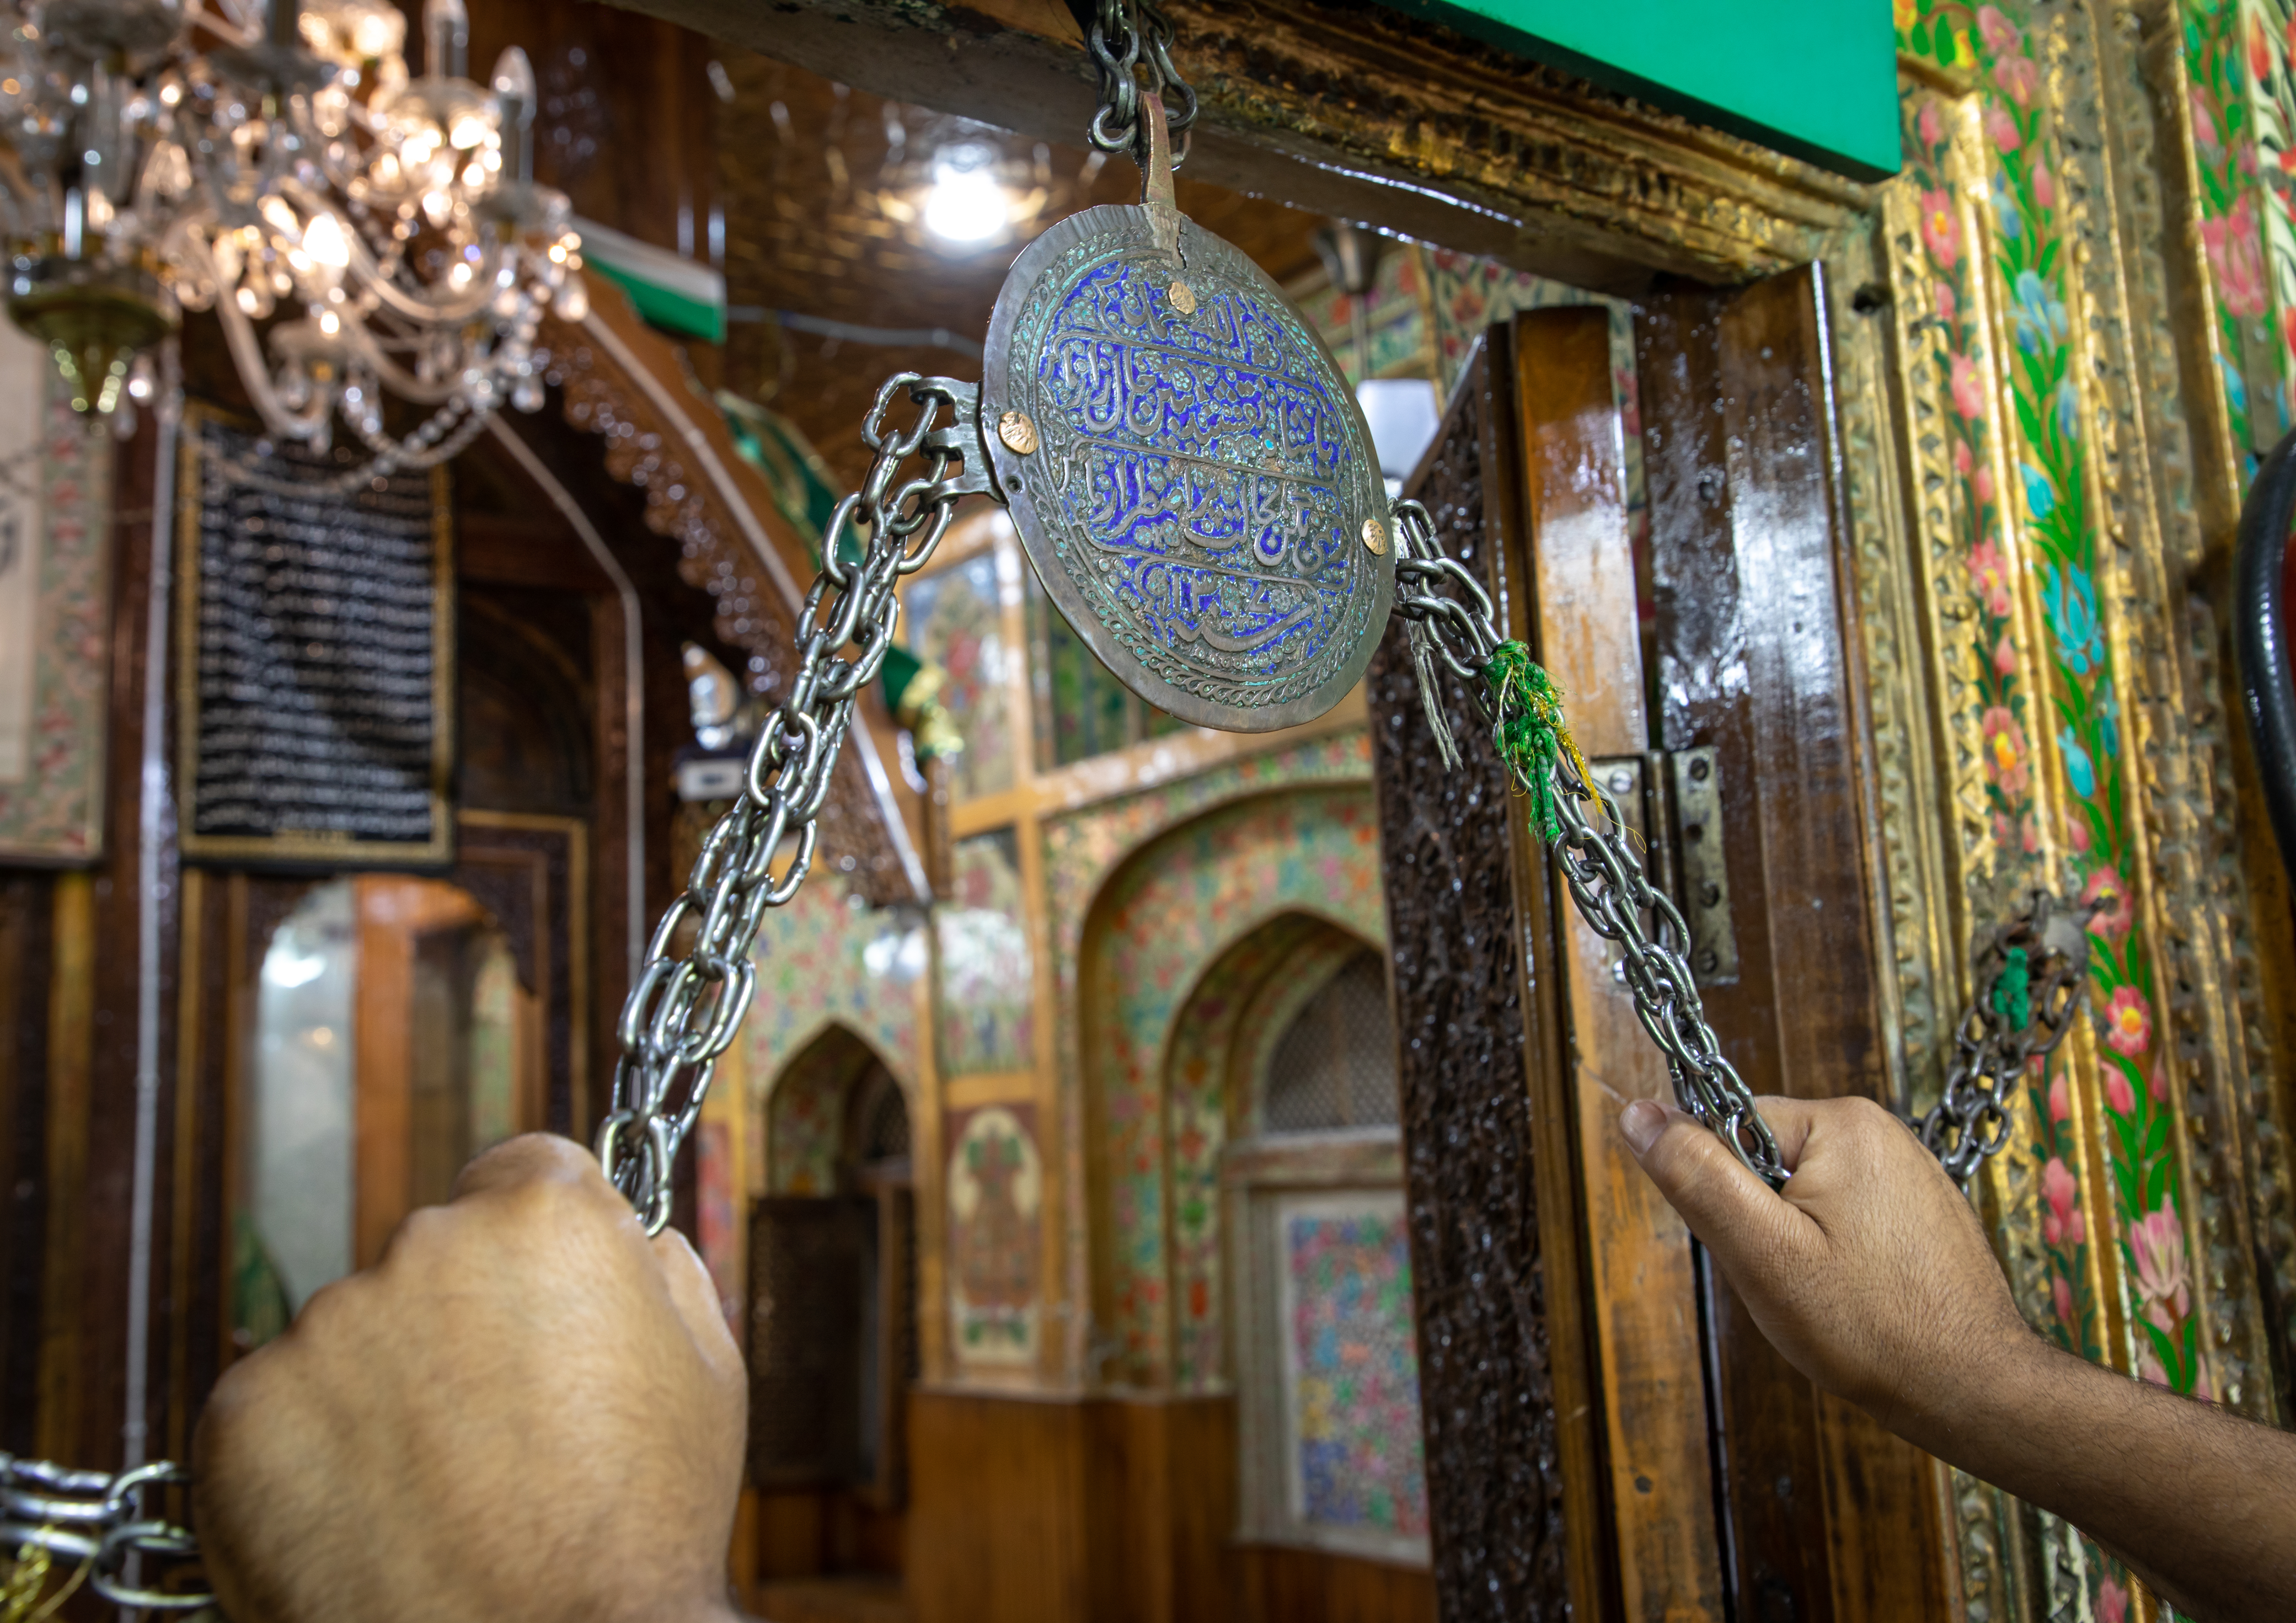 A man grasps chains as a sign of devotion on entering a Sufi shrine